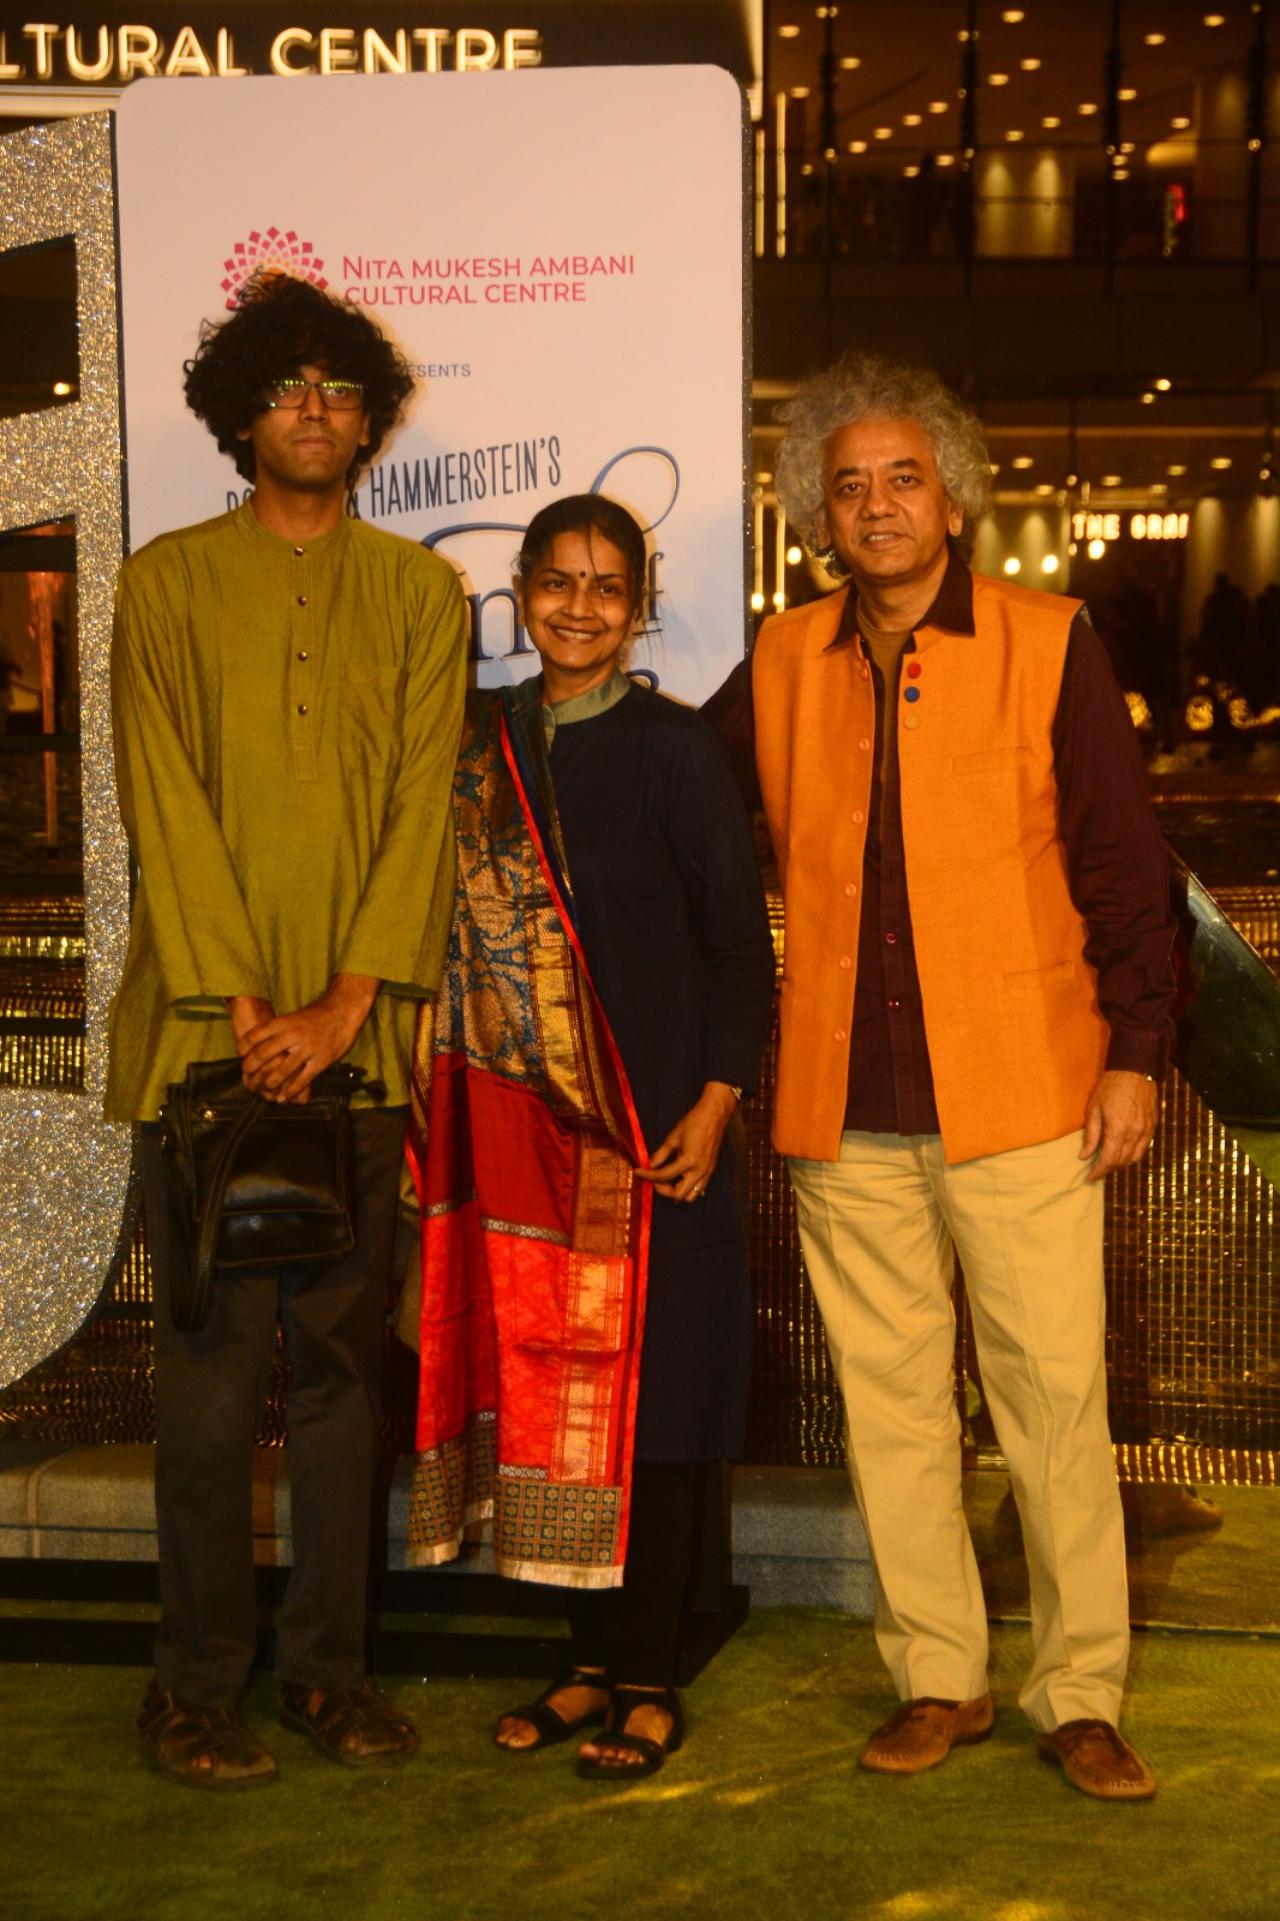 Taufiq Qureshi with his son and wife